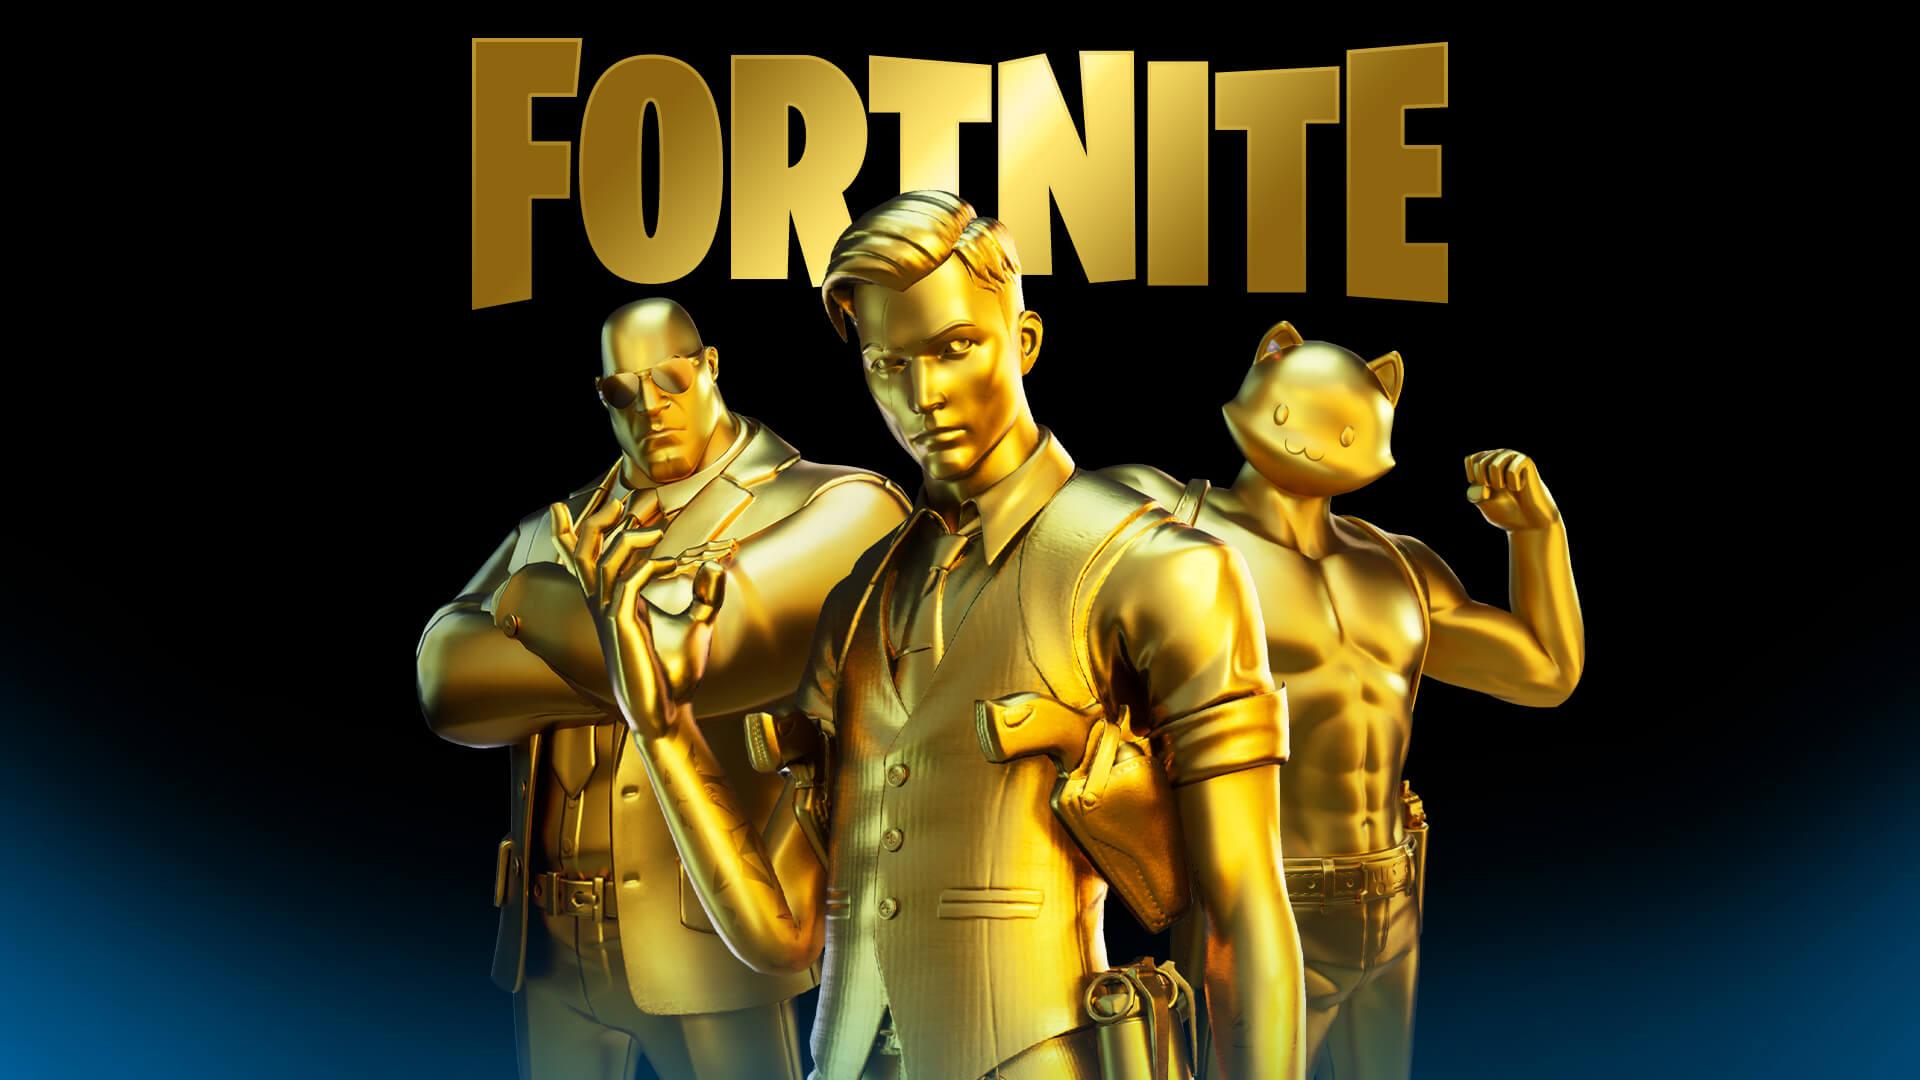 Fortnite_blog_fortnite-chapter-2-season-2-extended-until-early-june-2020_12BR_BP_SolidGold_Social-1920x1080-a941d11bb5a0a257ca813348d561af56c5a16d14.jpg